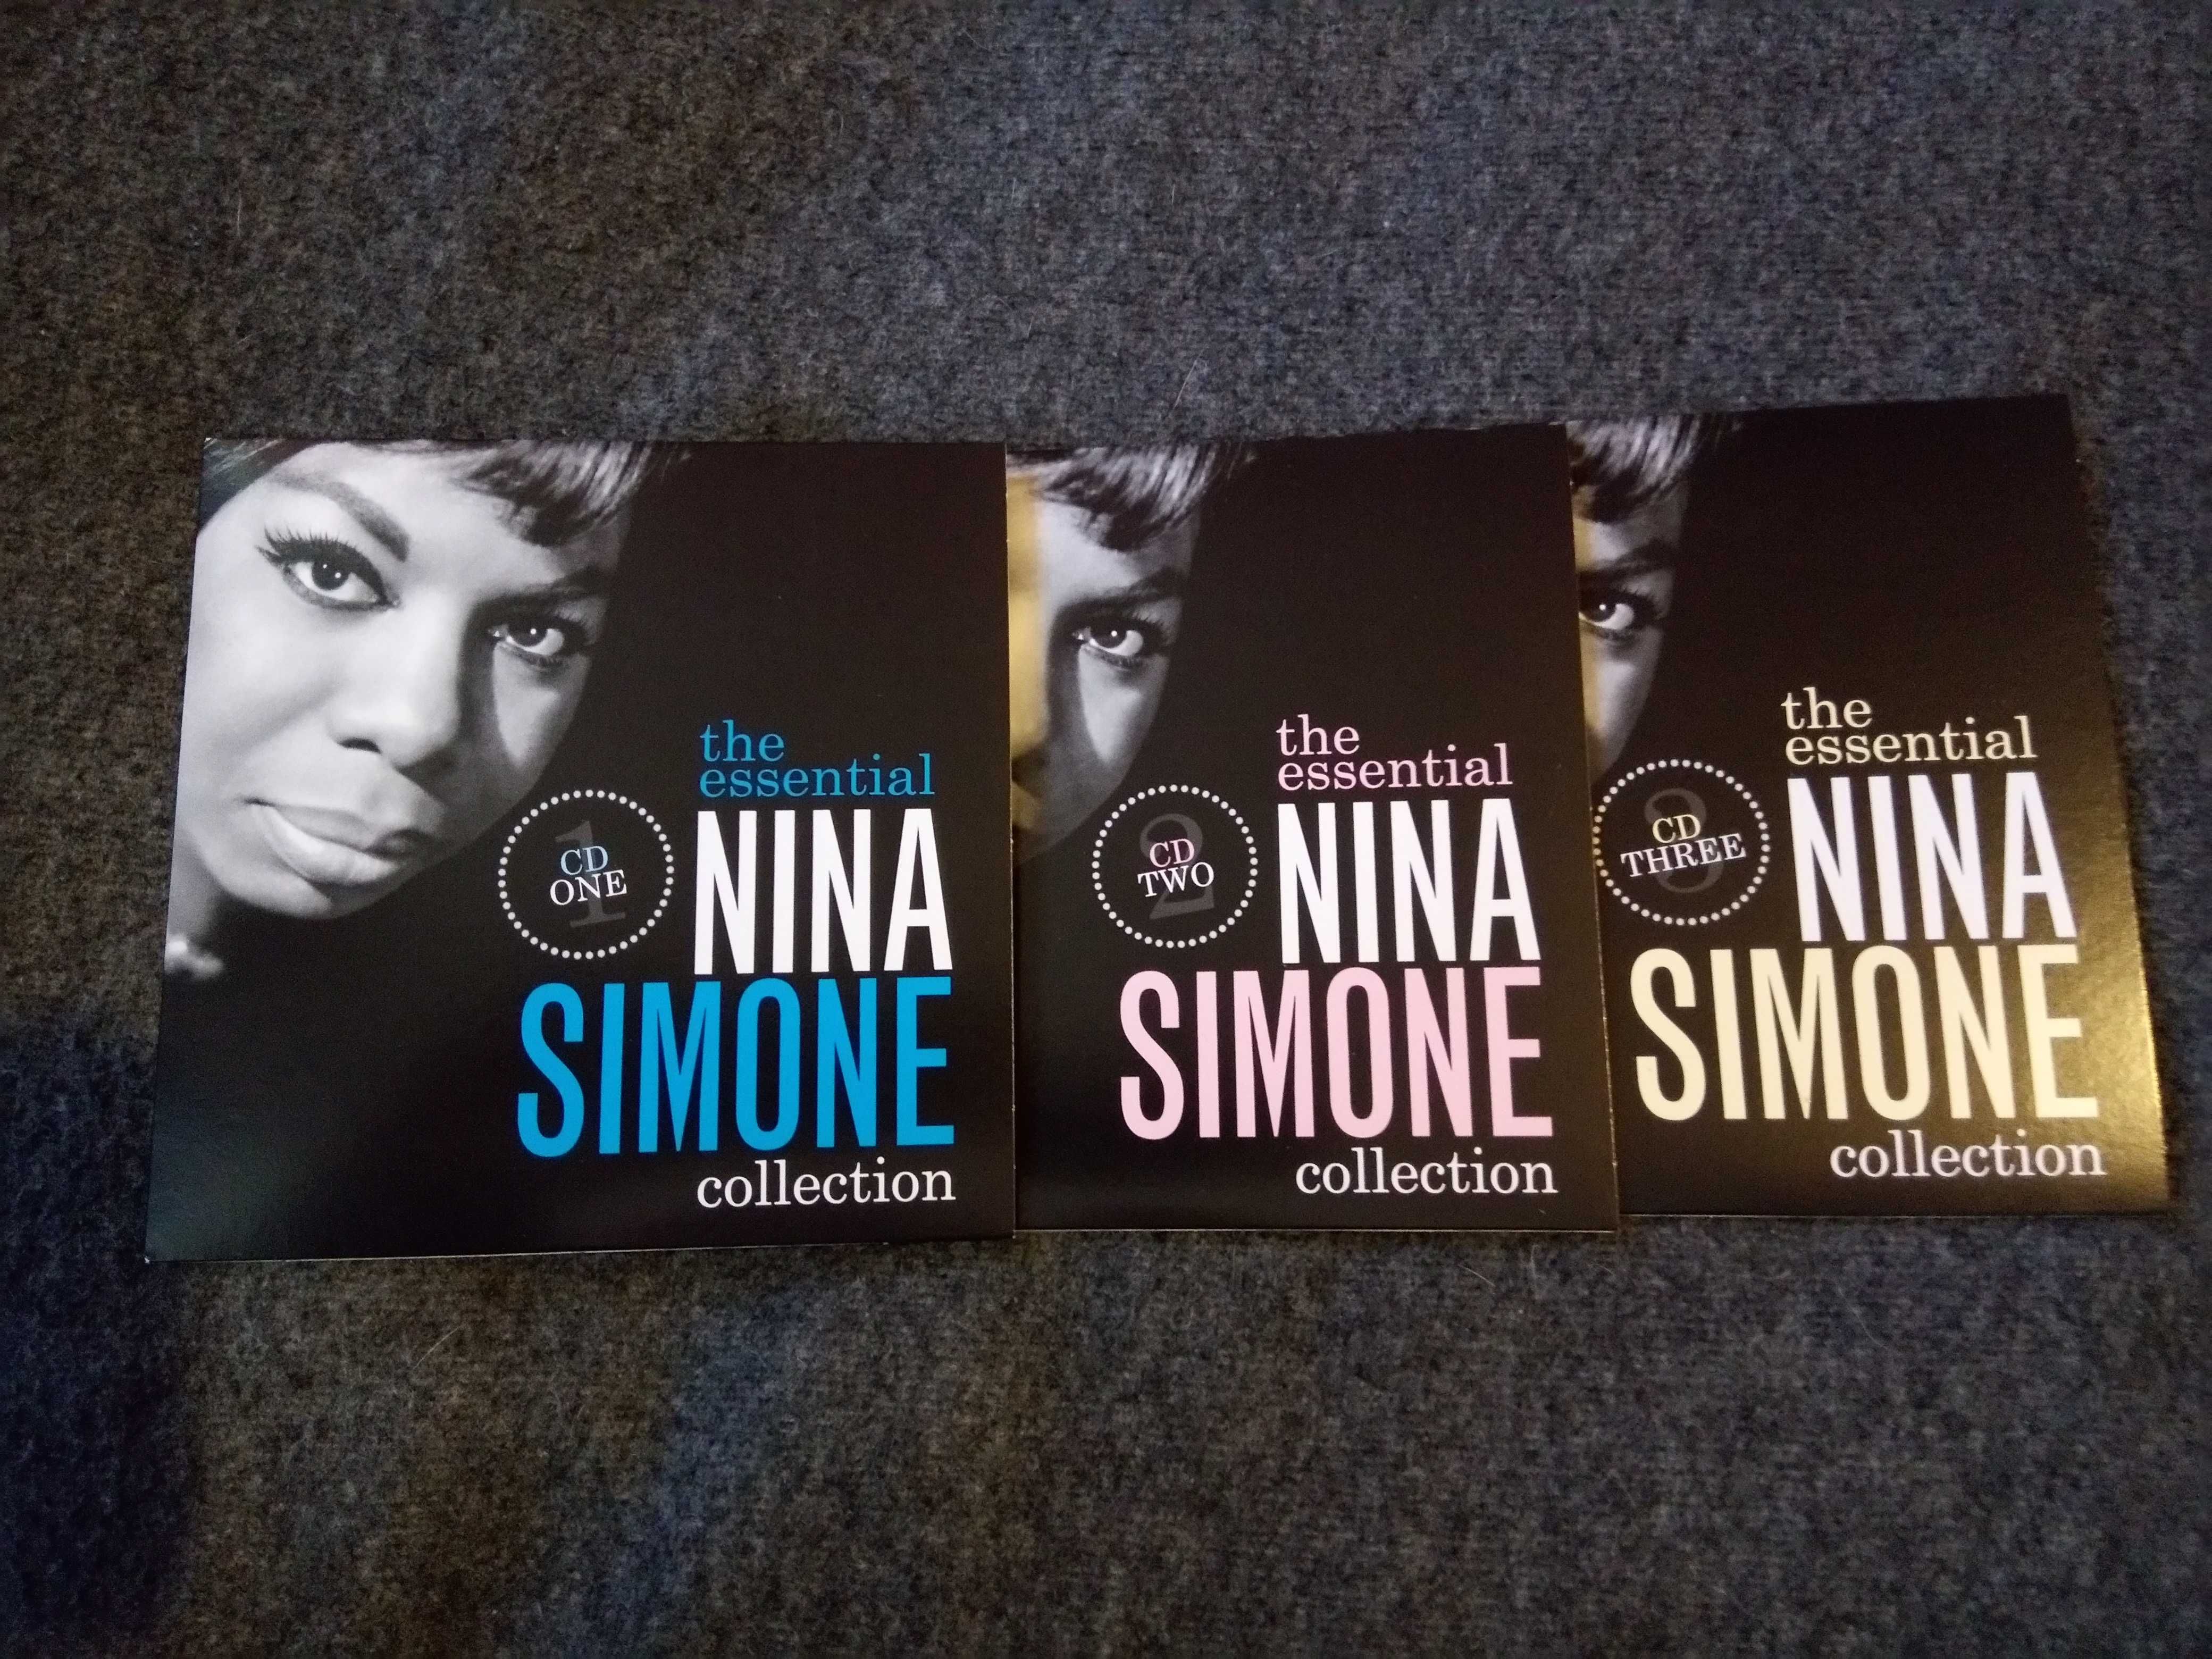 The Essential Nina Simone collection 3xcd - nowe